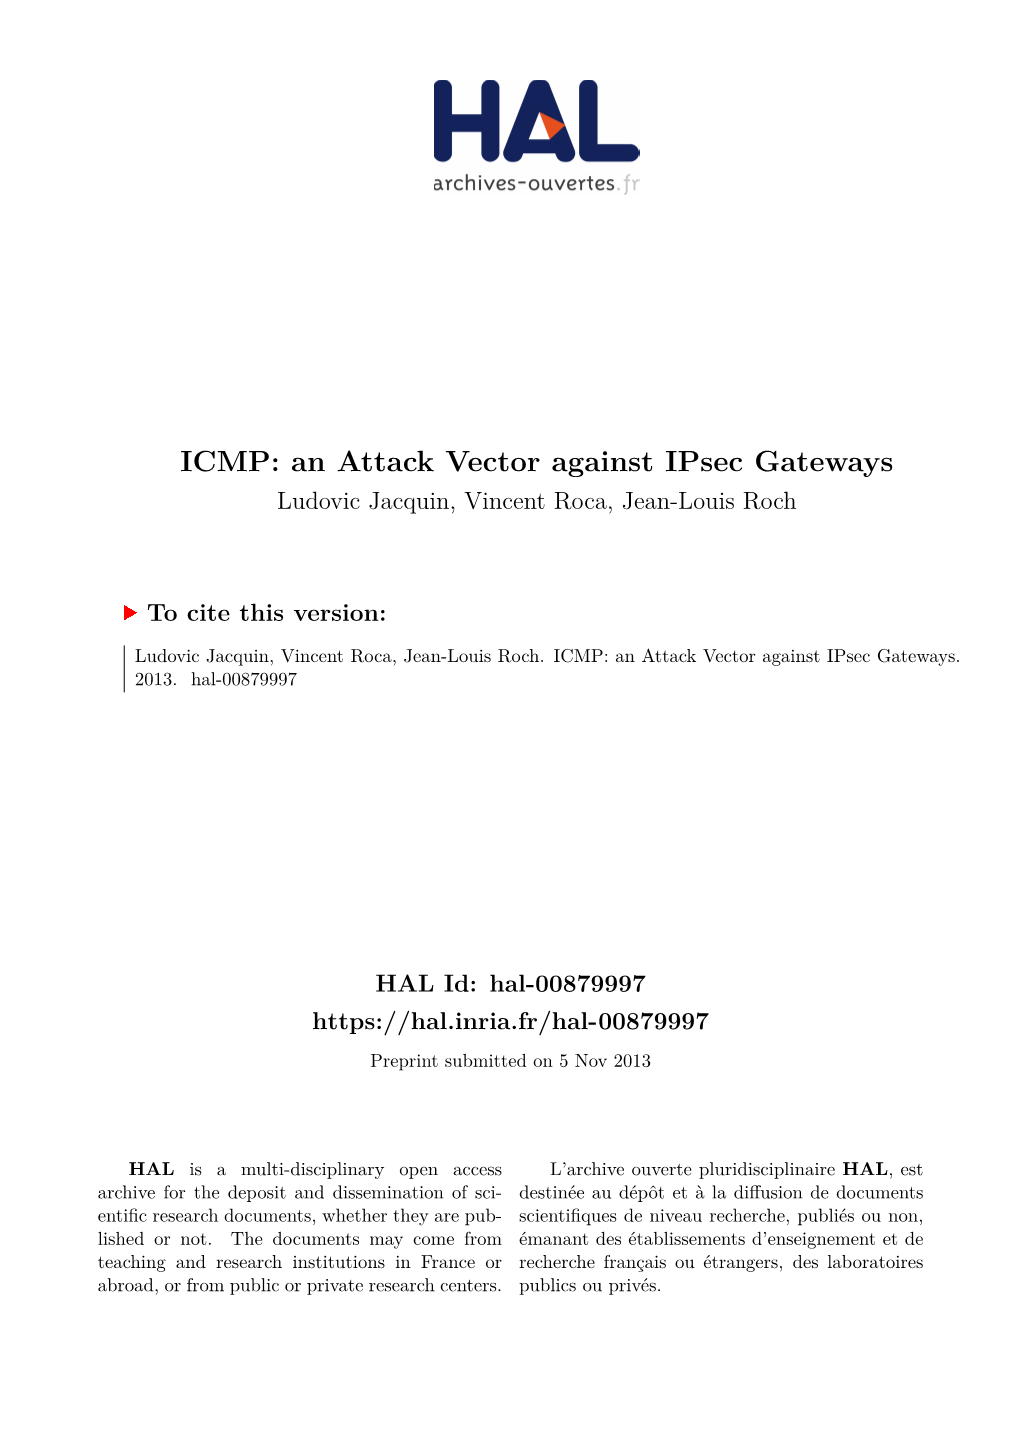 ICMP: an Attack Vector Against Ipsec Gateways Ludovic Jacquin, Vincent Roca, Jean-Louis Roch